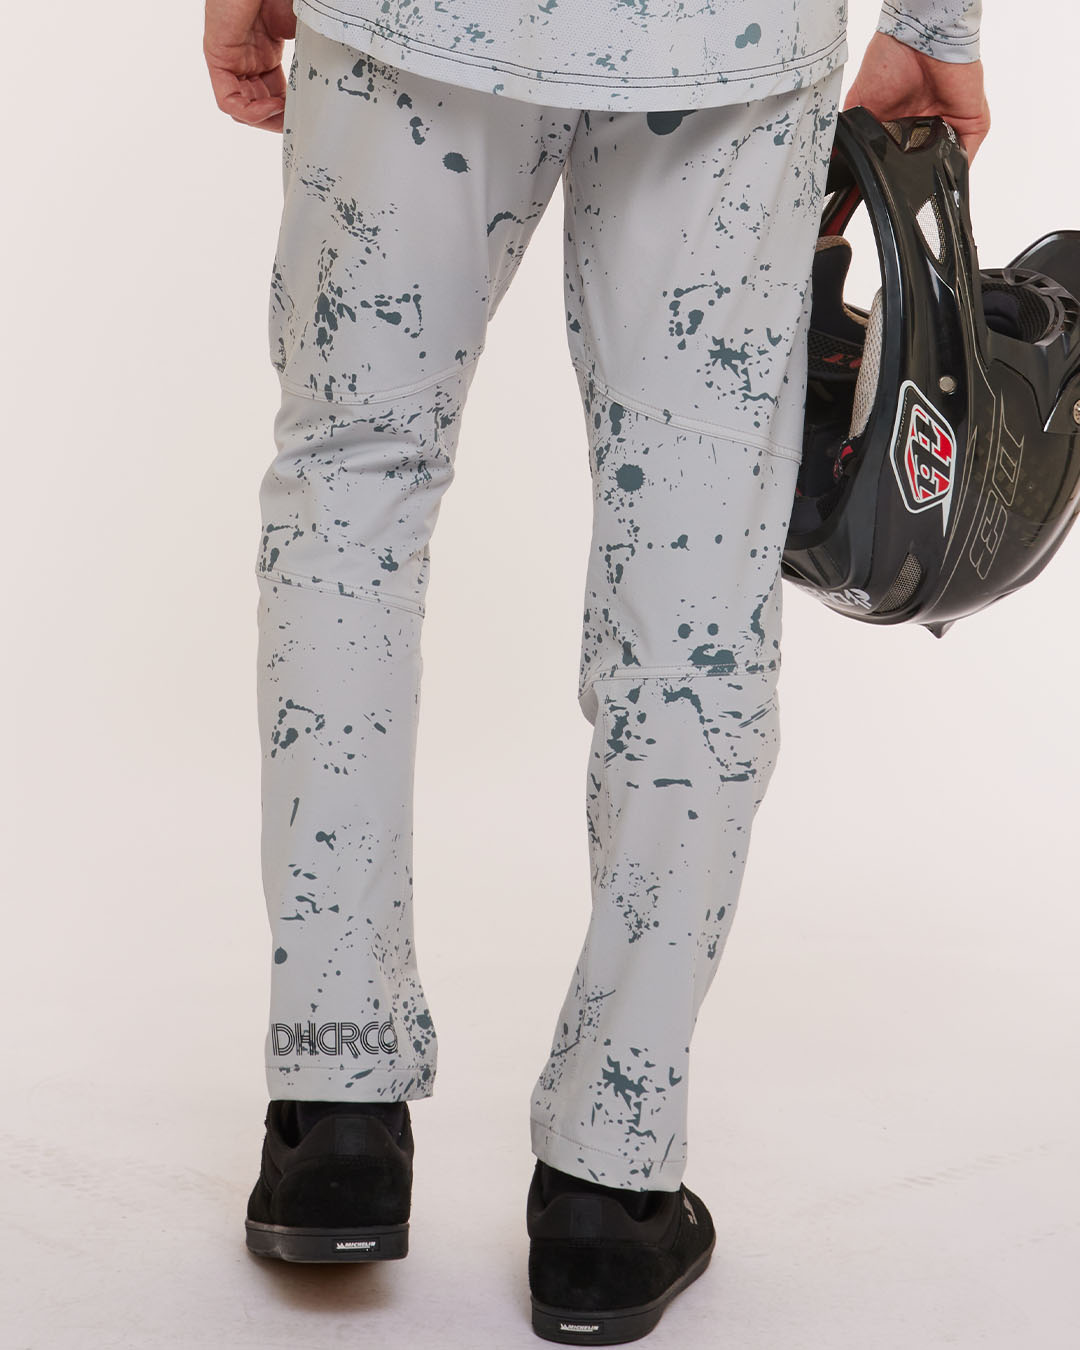 Mens Gravity Pants  Cookies and Cream - DHaRCO Clothing